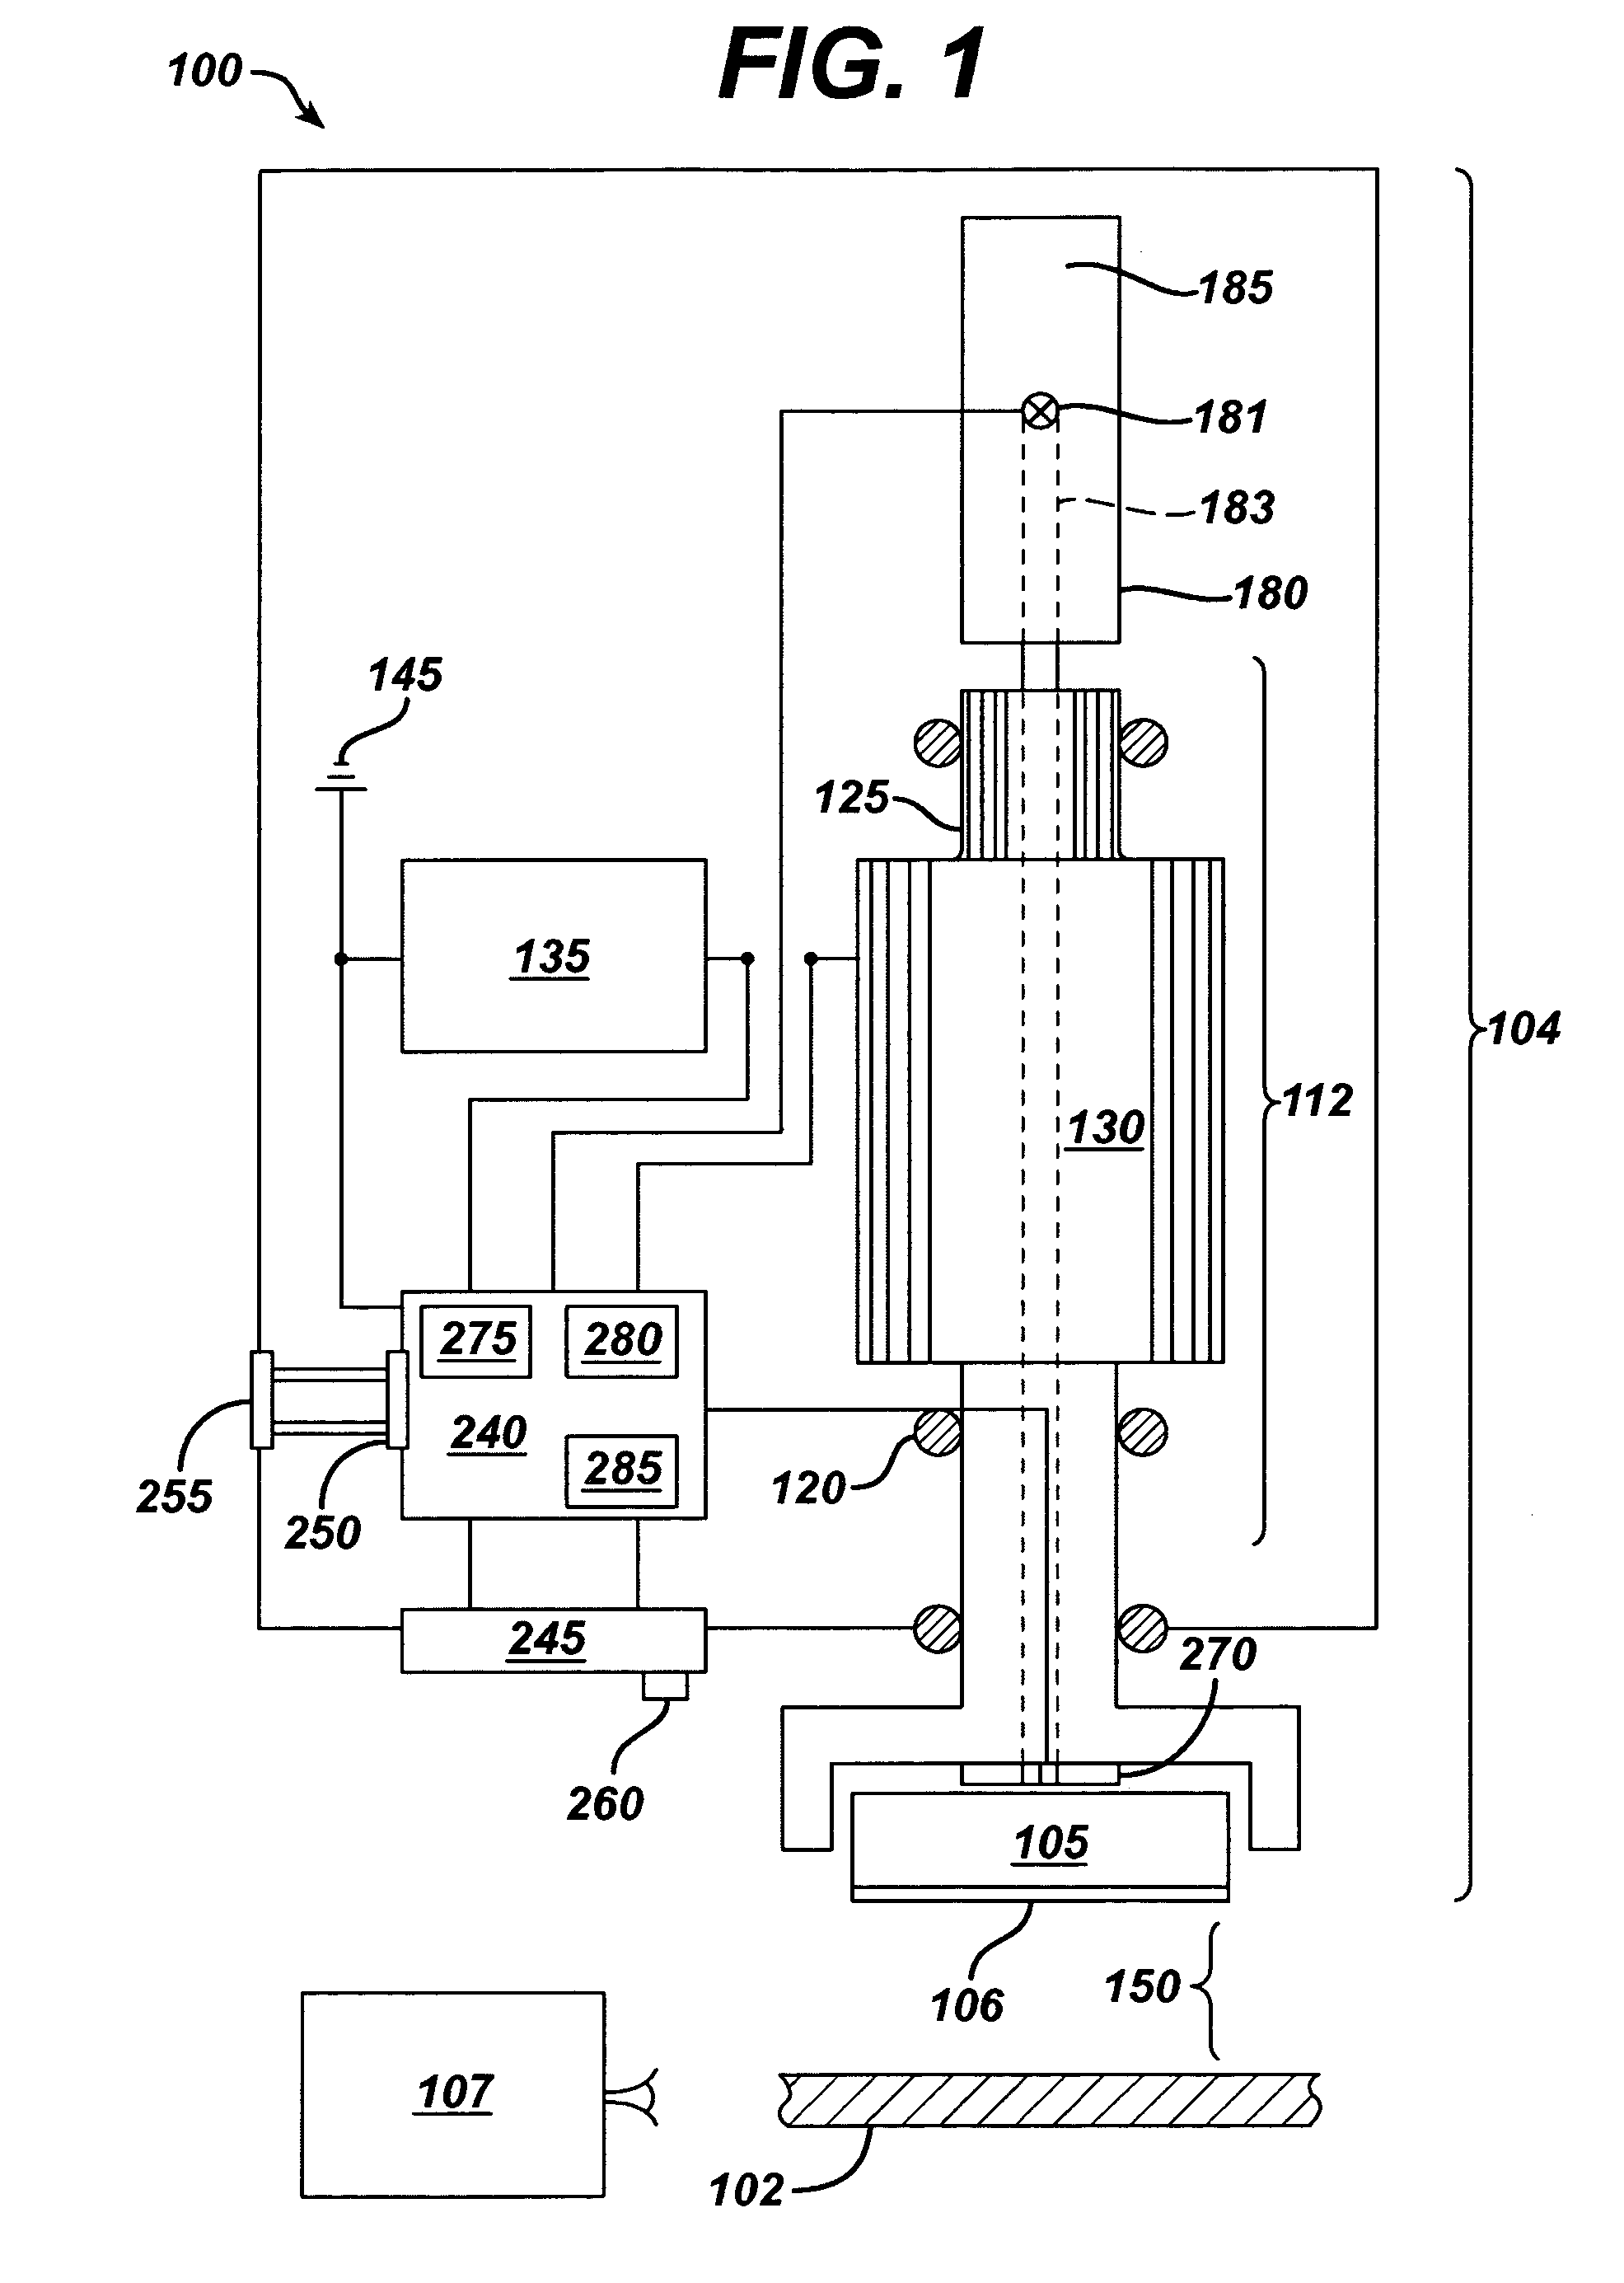 Treatment of skin with an apparatus and a benefit agent